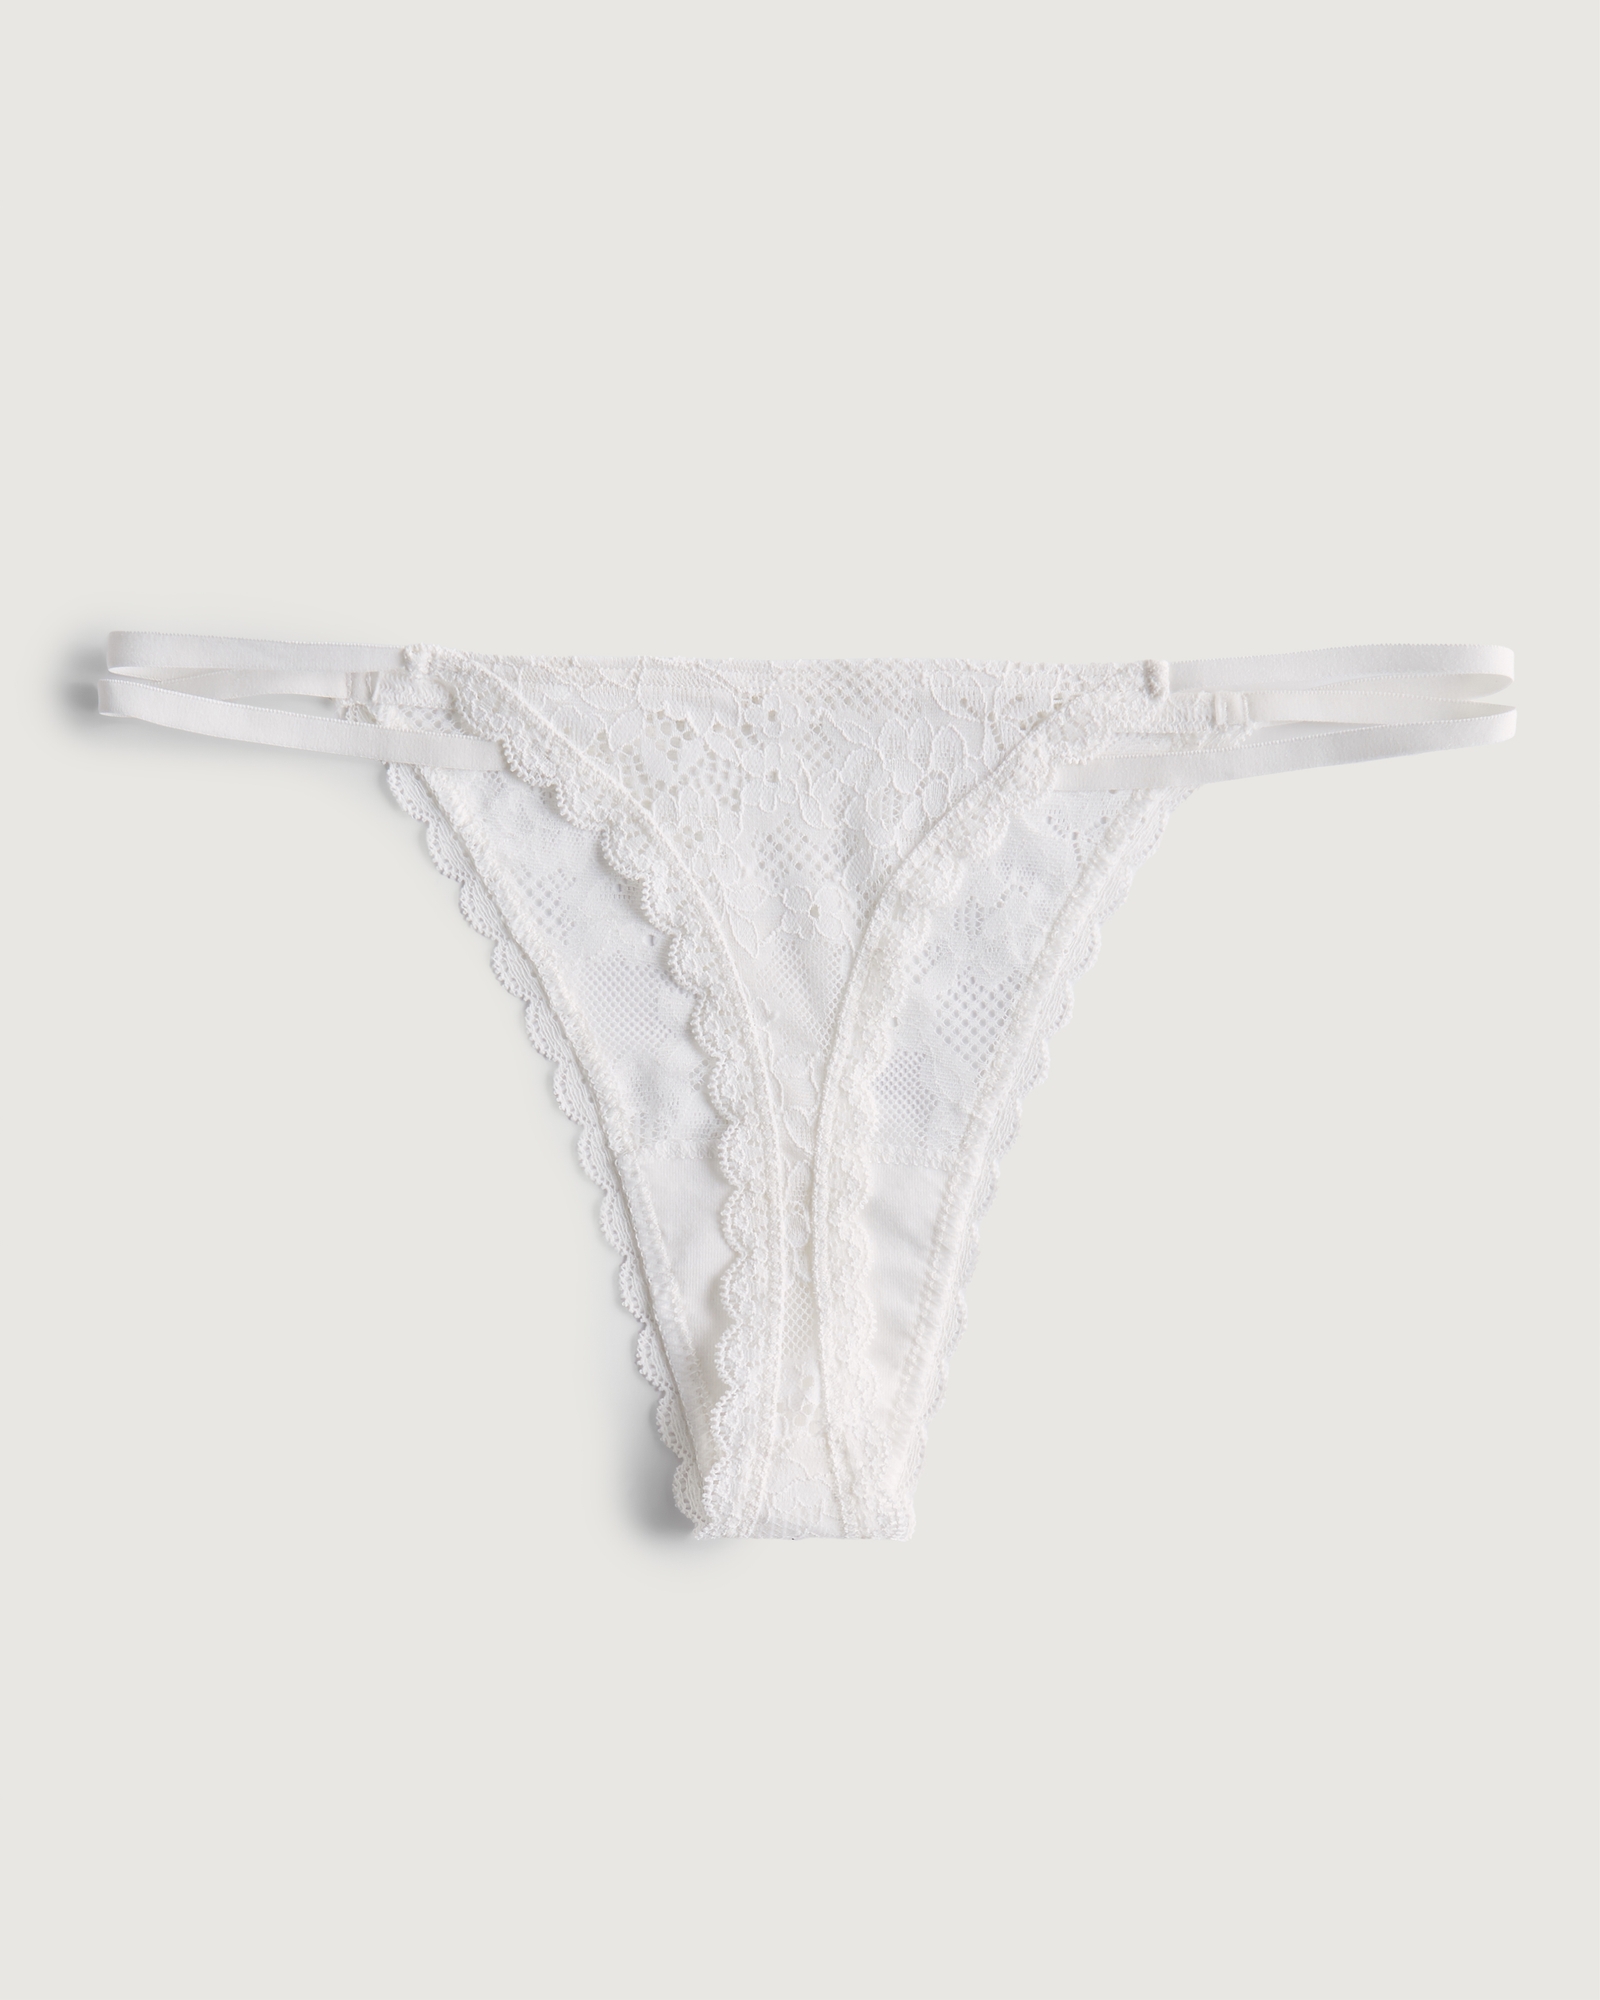 Women's Gilly Hicks Lace Strappy Thong Underwear - Hollister